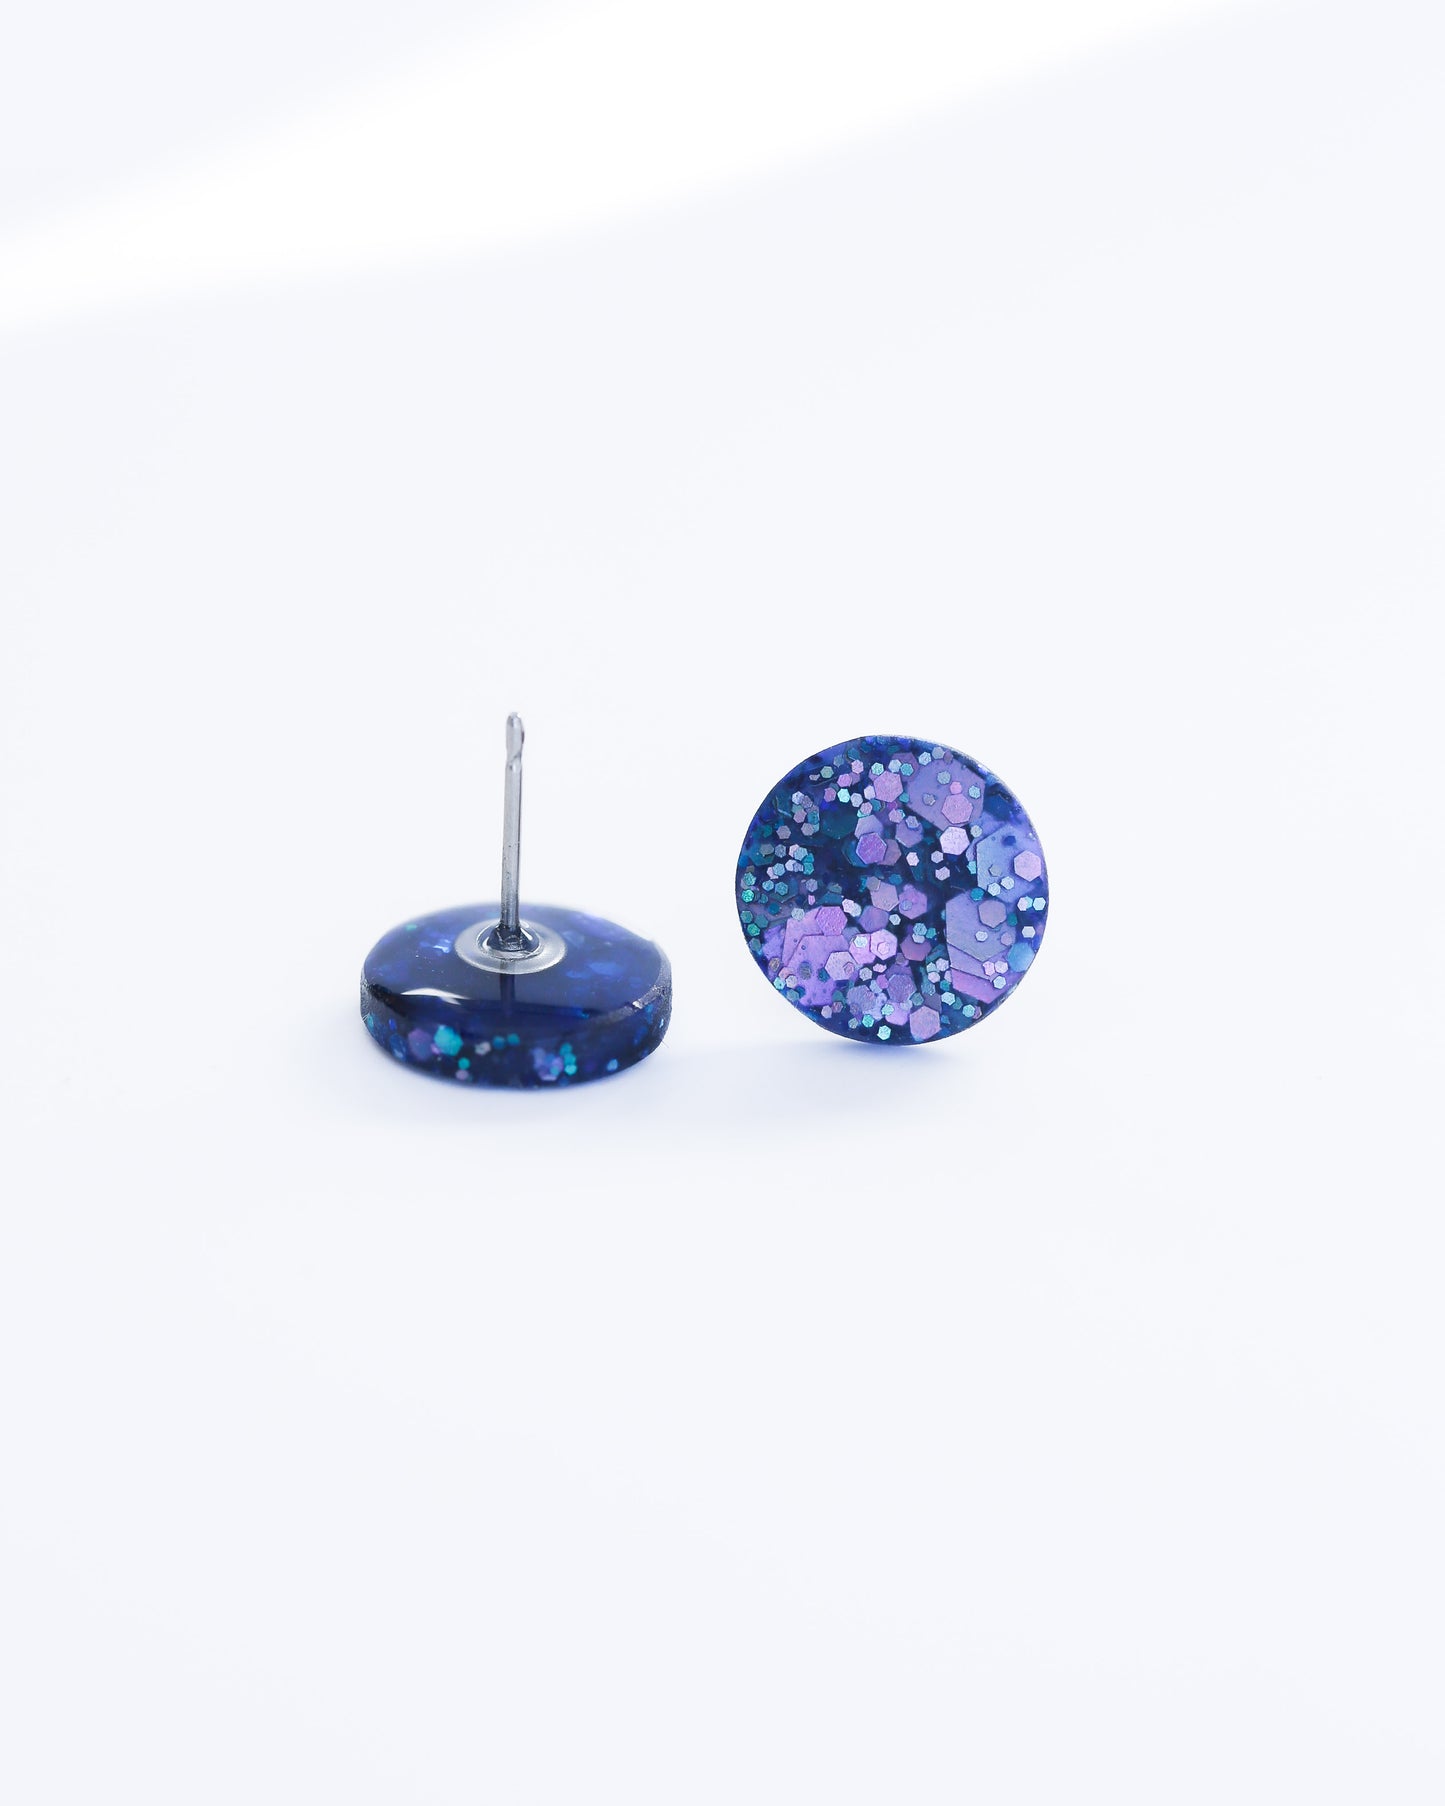 Matte glitter stud earrings made with stainless steel posts